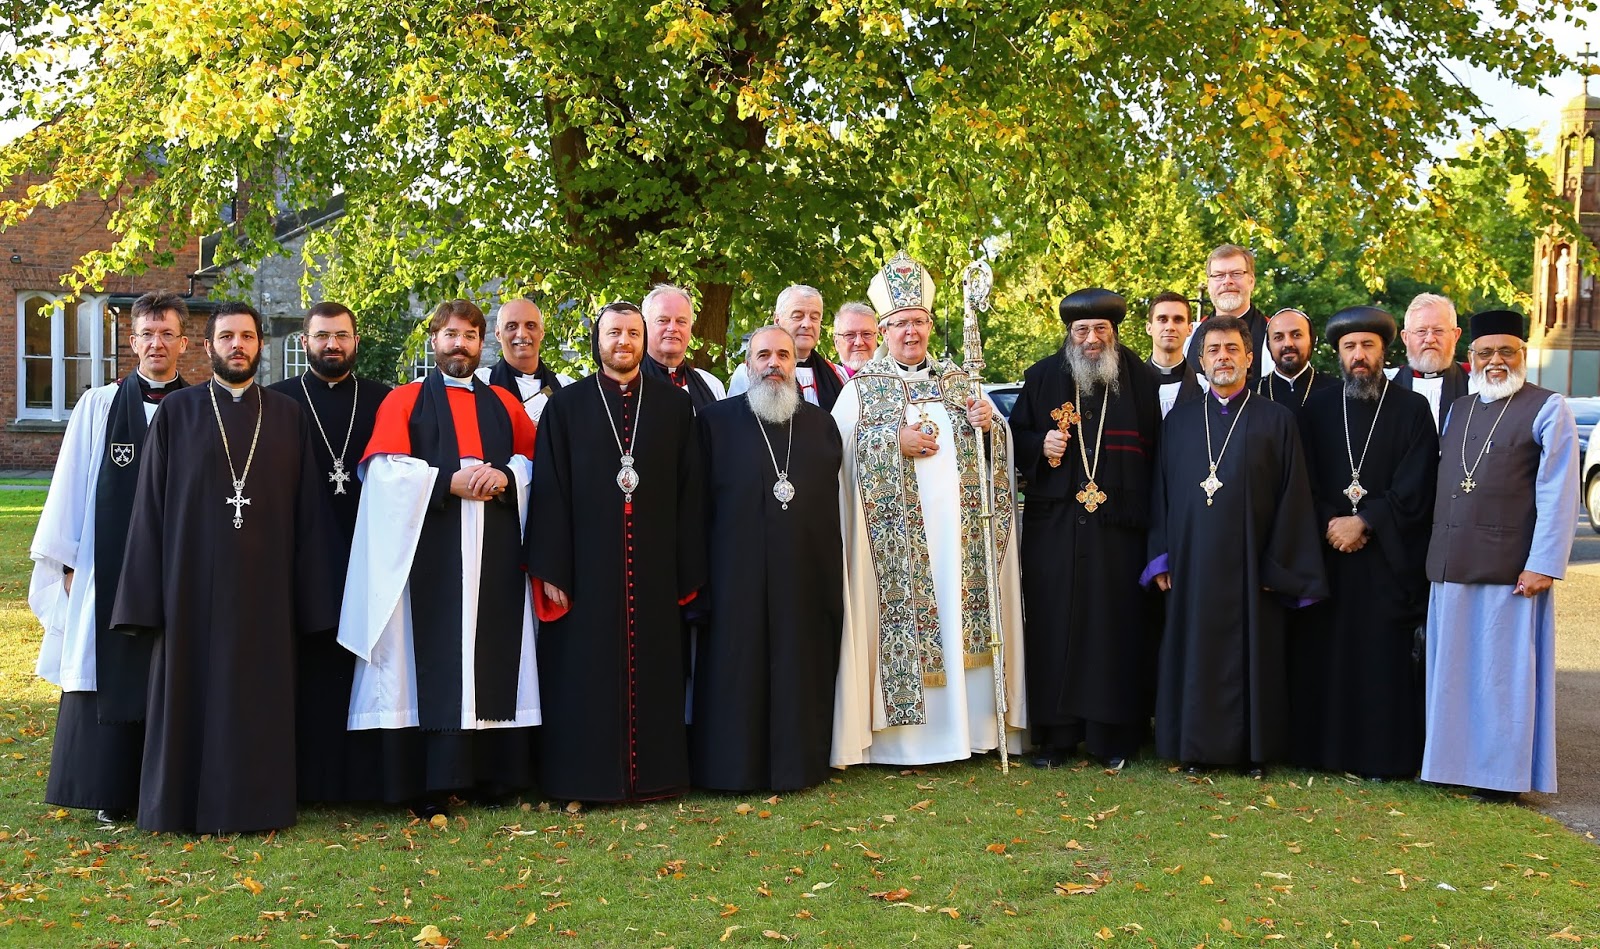 Anglican-Oriental Orthodox International Commission publishes historic ‘Agreed Statement on Christology’